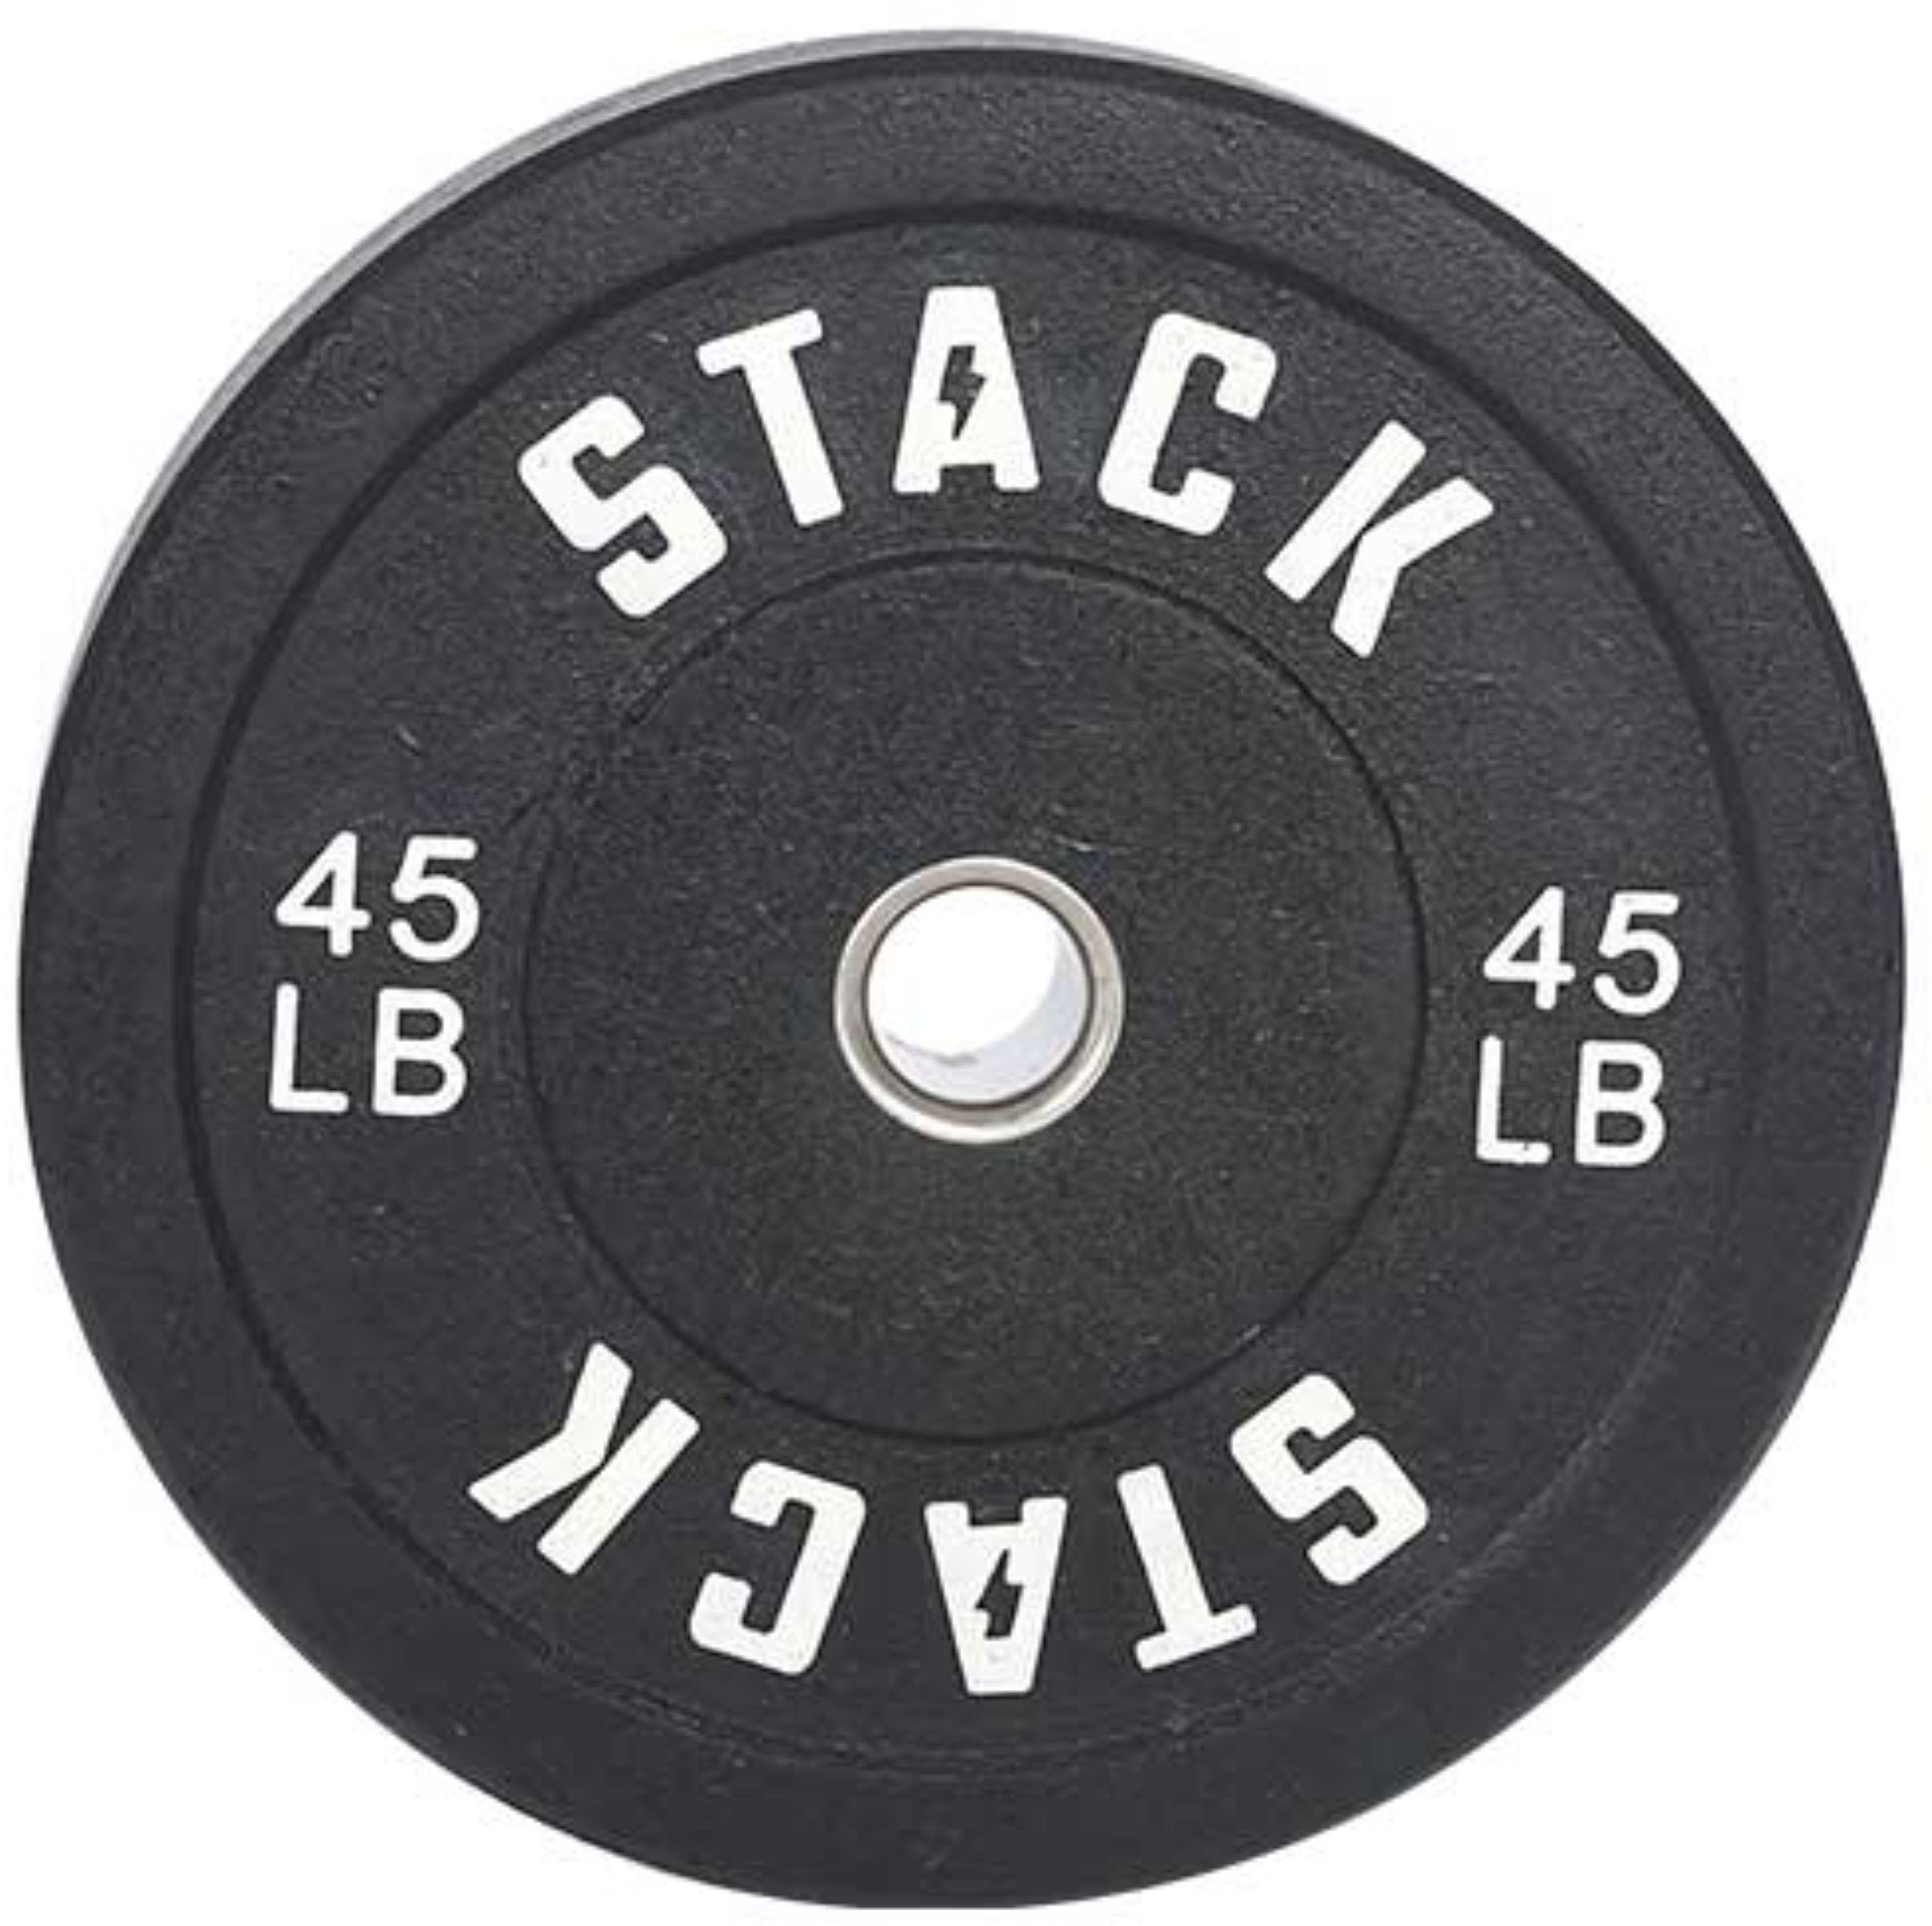 Stack Fitness Stack Weight Plates 45LB (pair) Black Stack Weight Plates ...